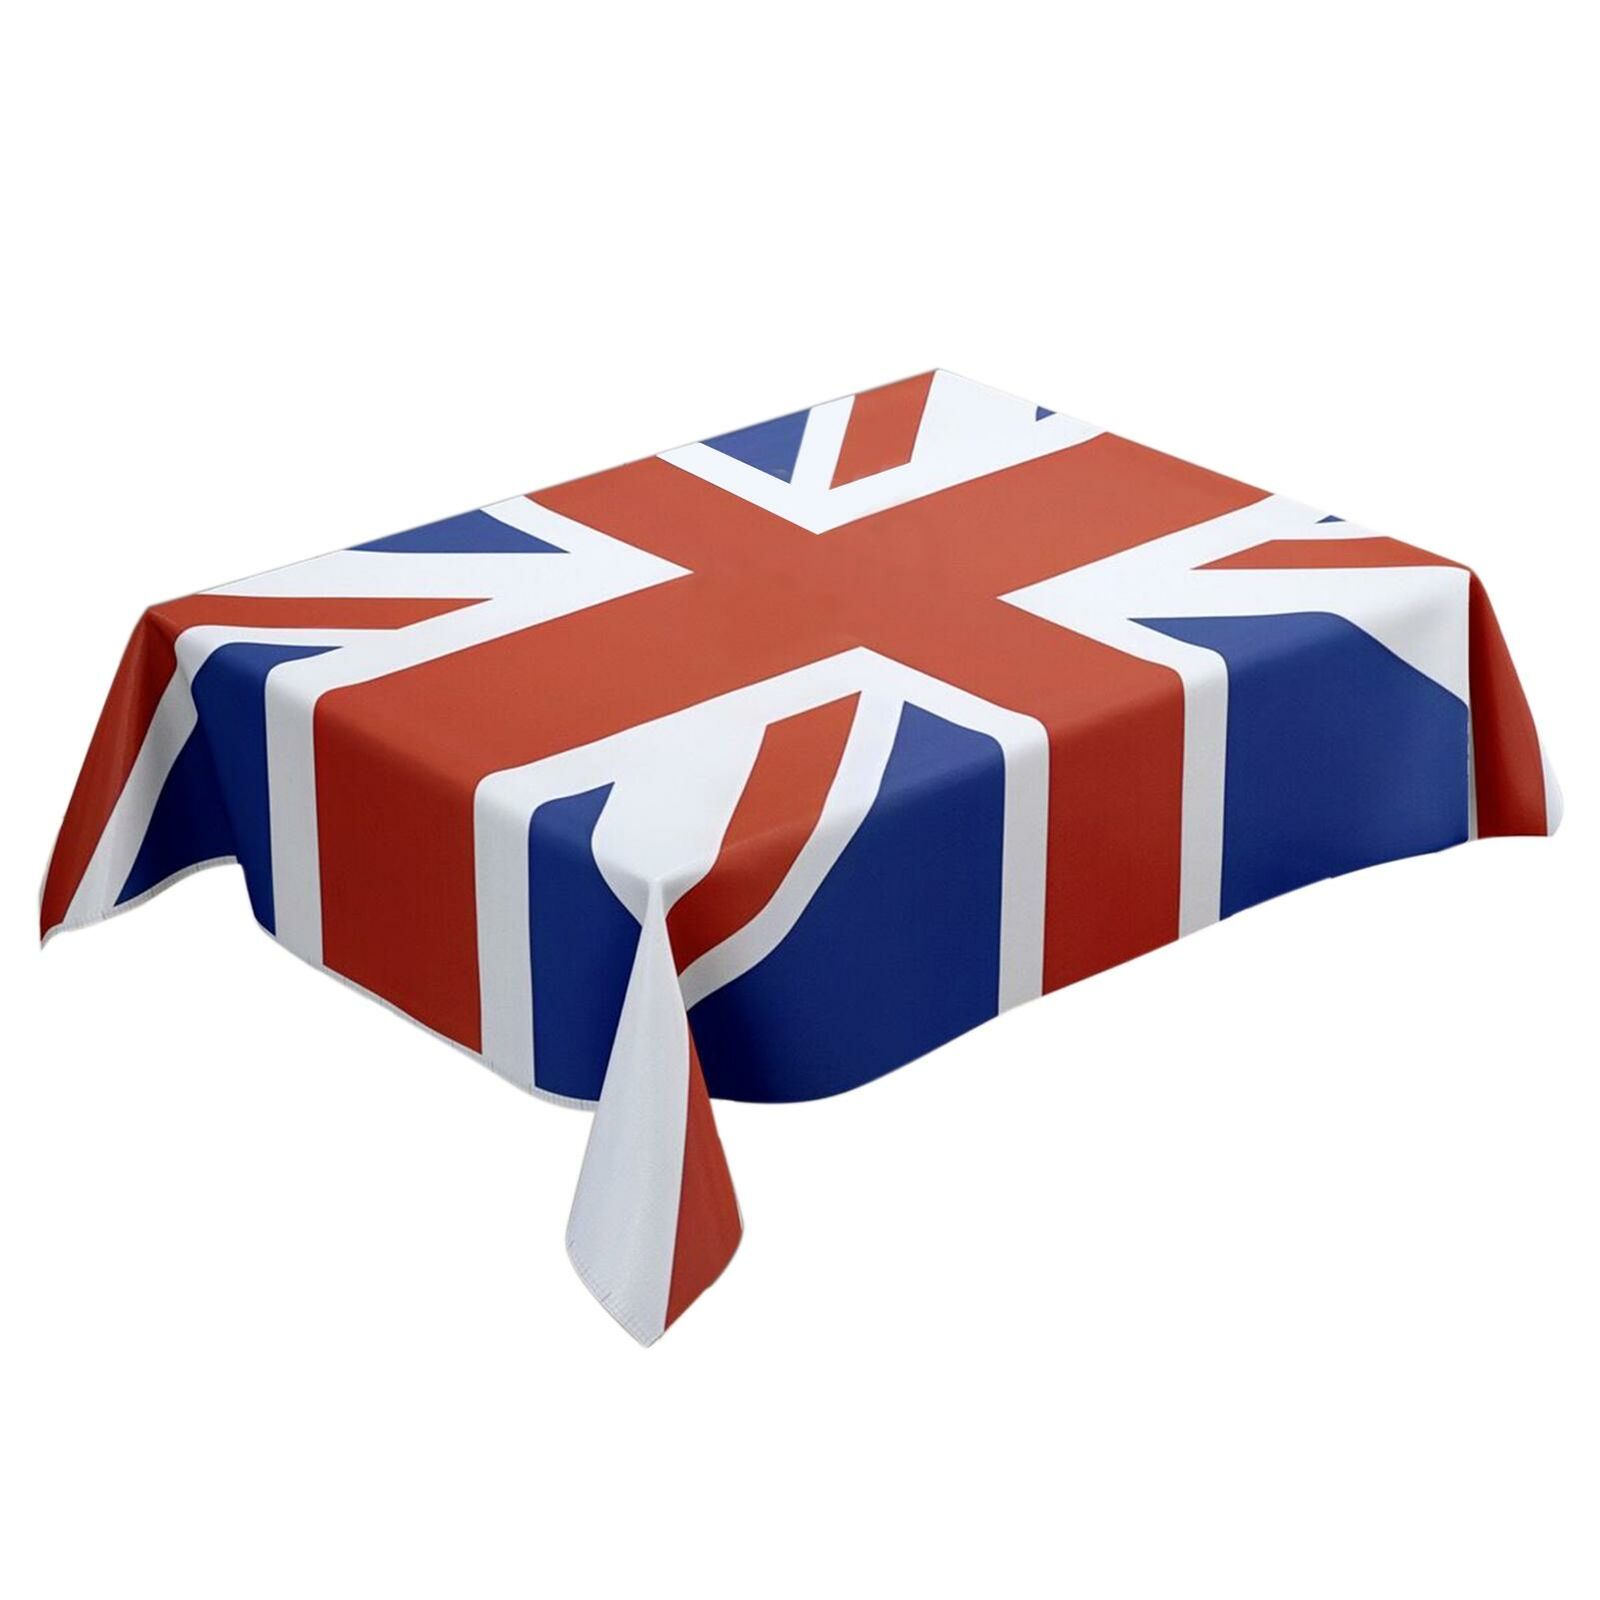 Union Jack Table Cover UK Royal Party Tablecloth Reusable UK Flag Table Cover